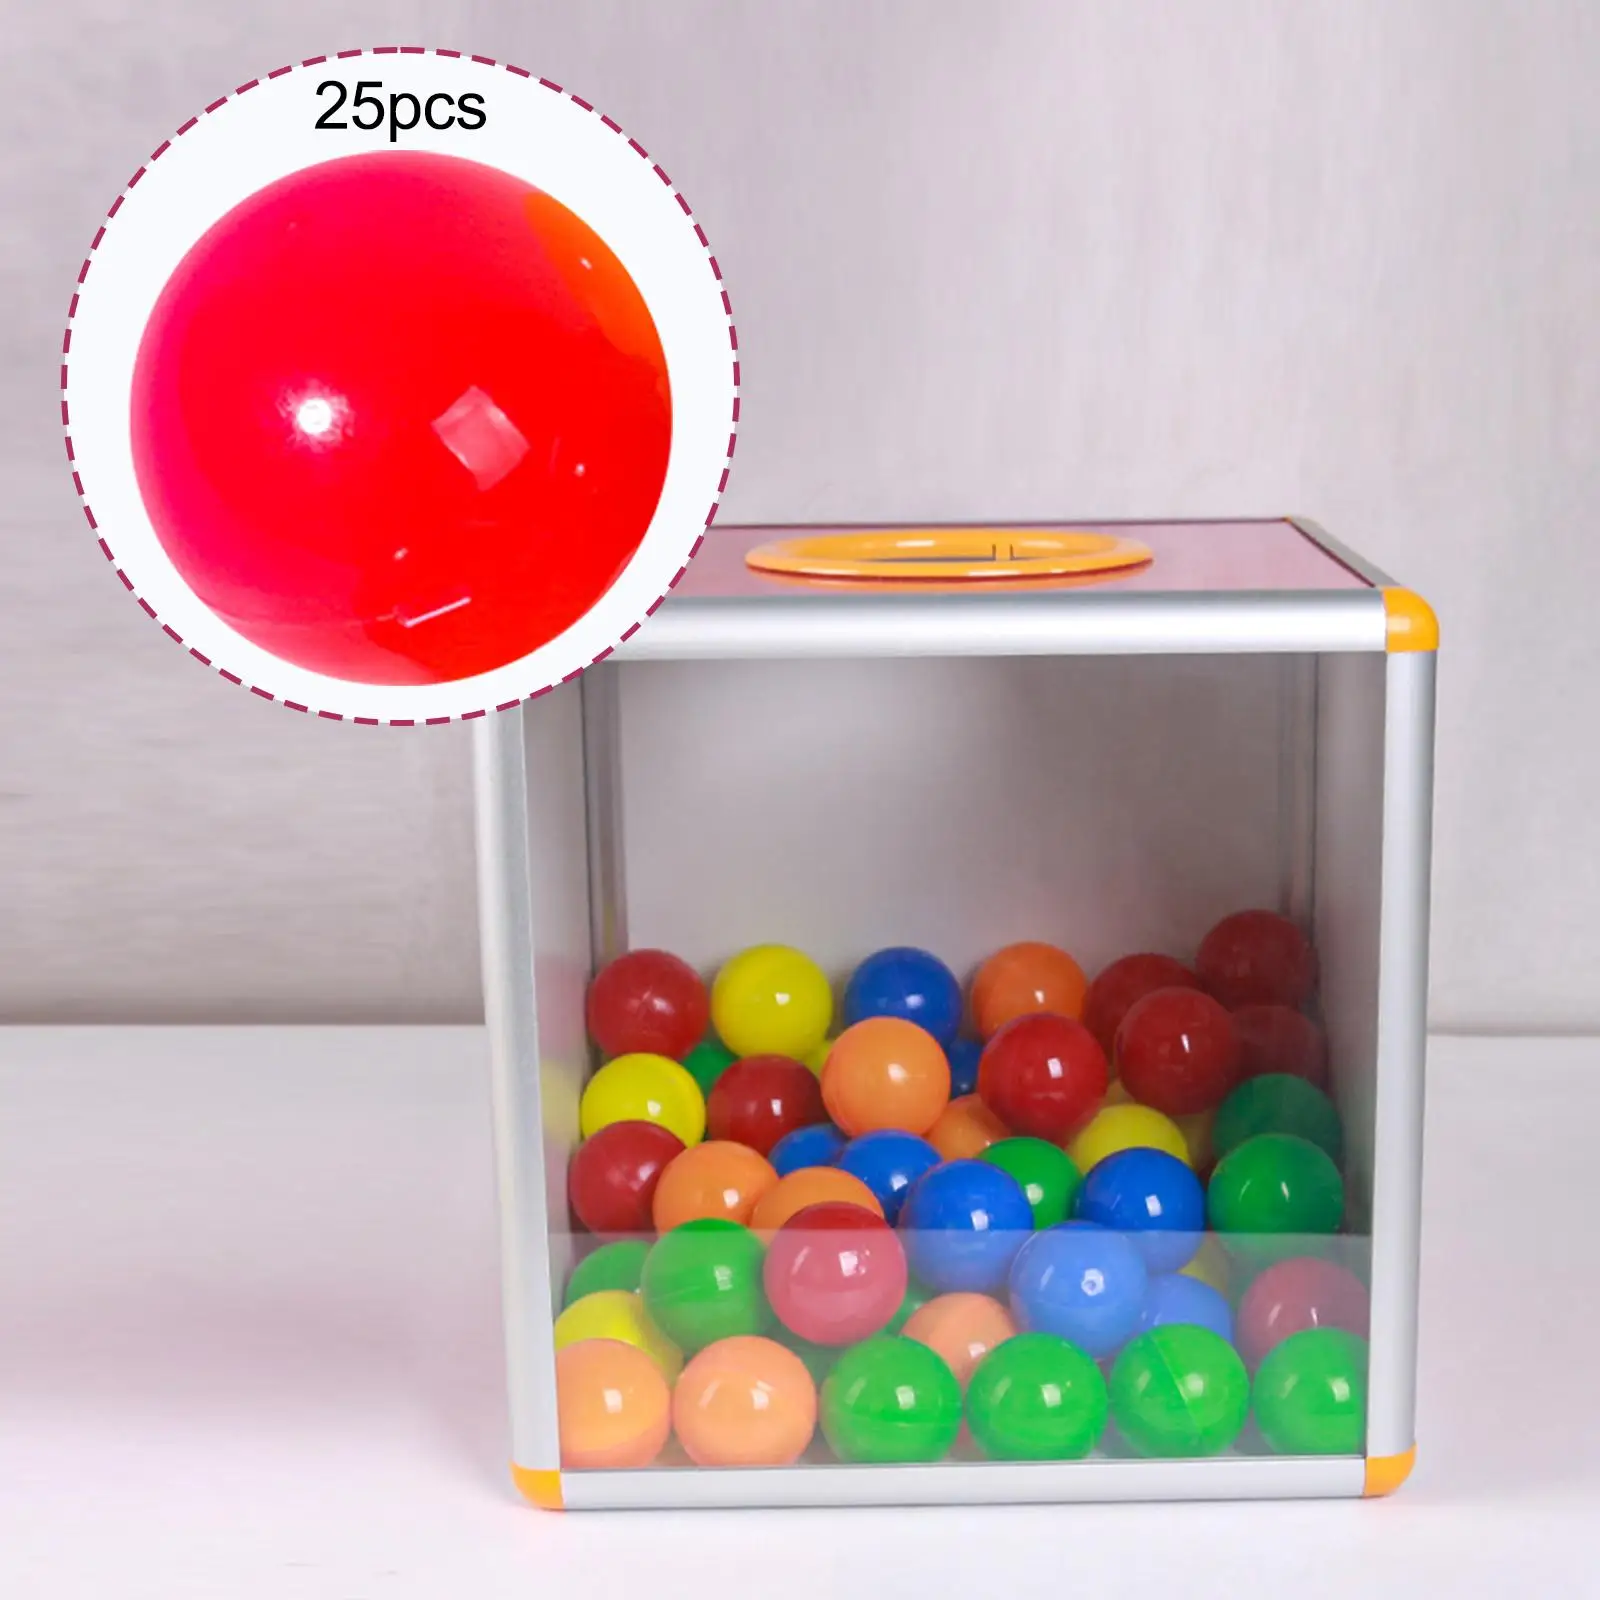 25 Pieces Bingo Ball Devices Durable Direct Replaces Calling Balls for Regal Game Large Group Games Family Entertainment Nights